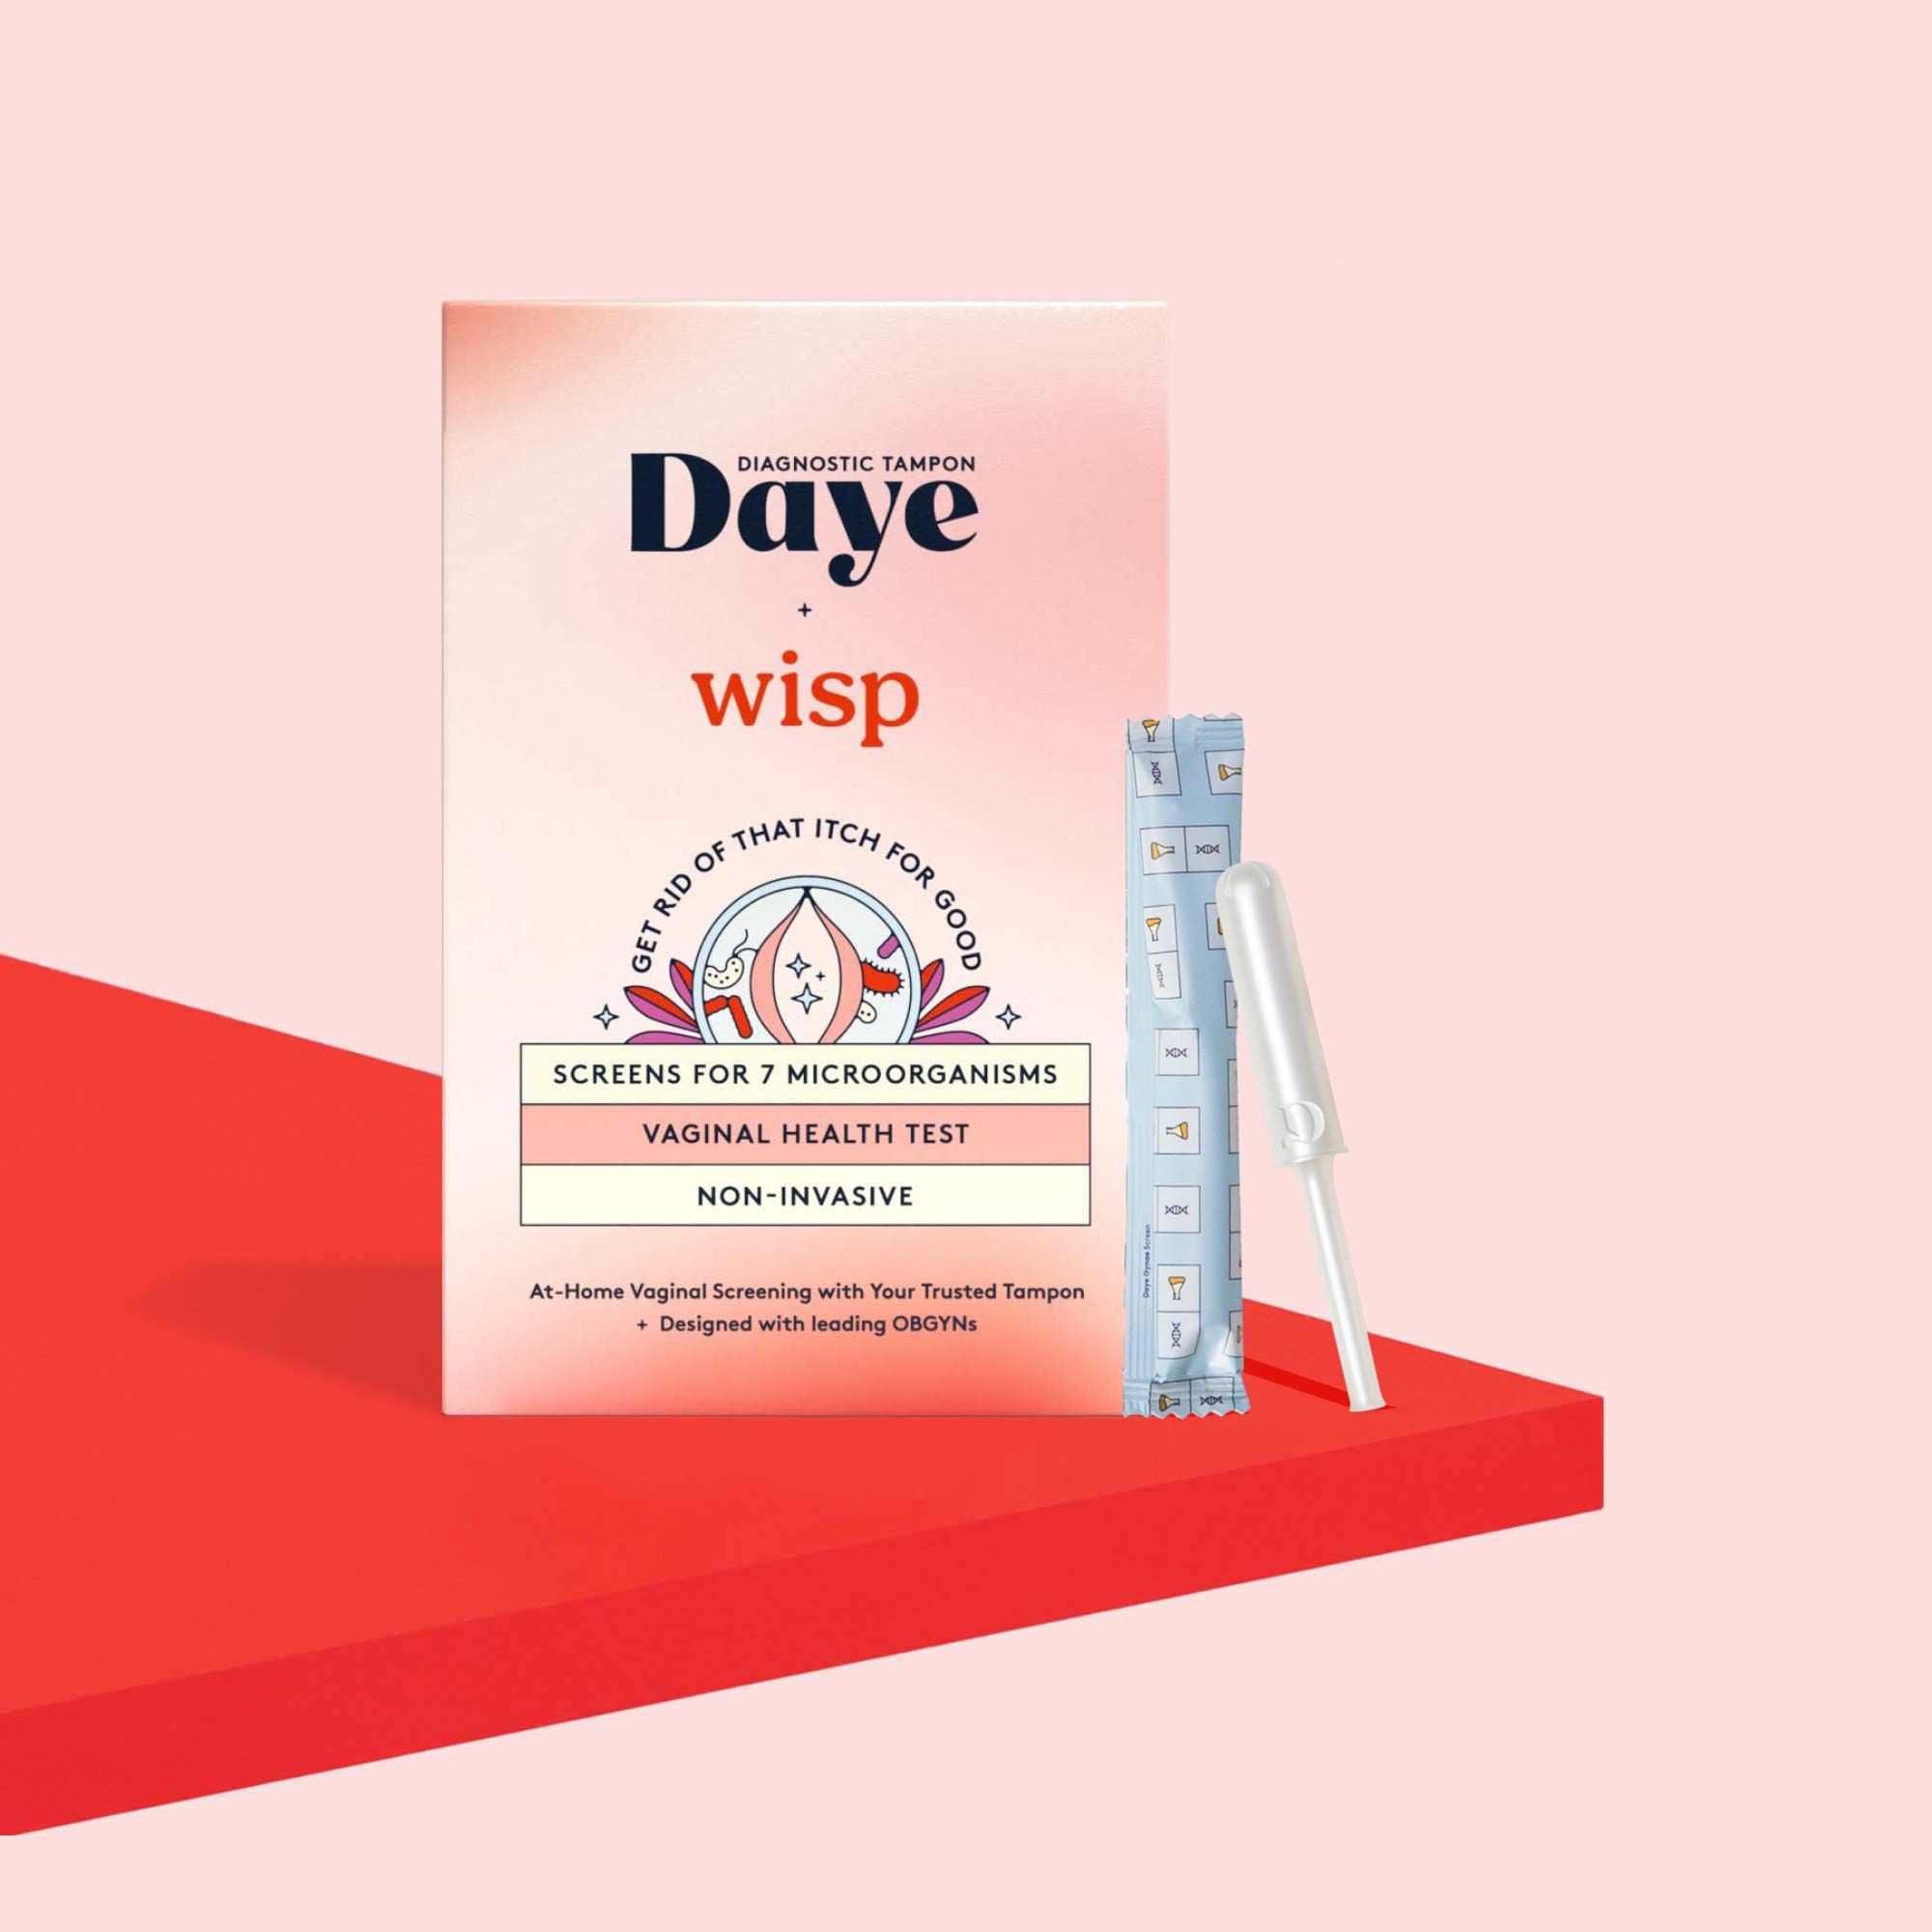 Daye's At-Home Vaginal Microbiome Testing Kit box on a red surface with a pink background